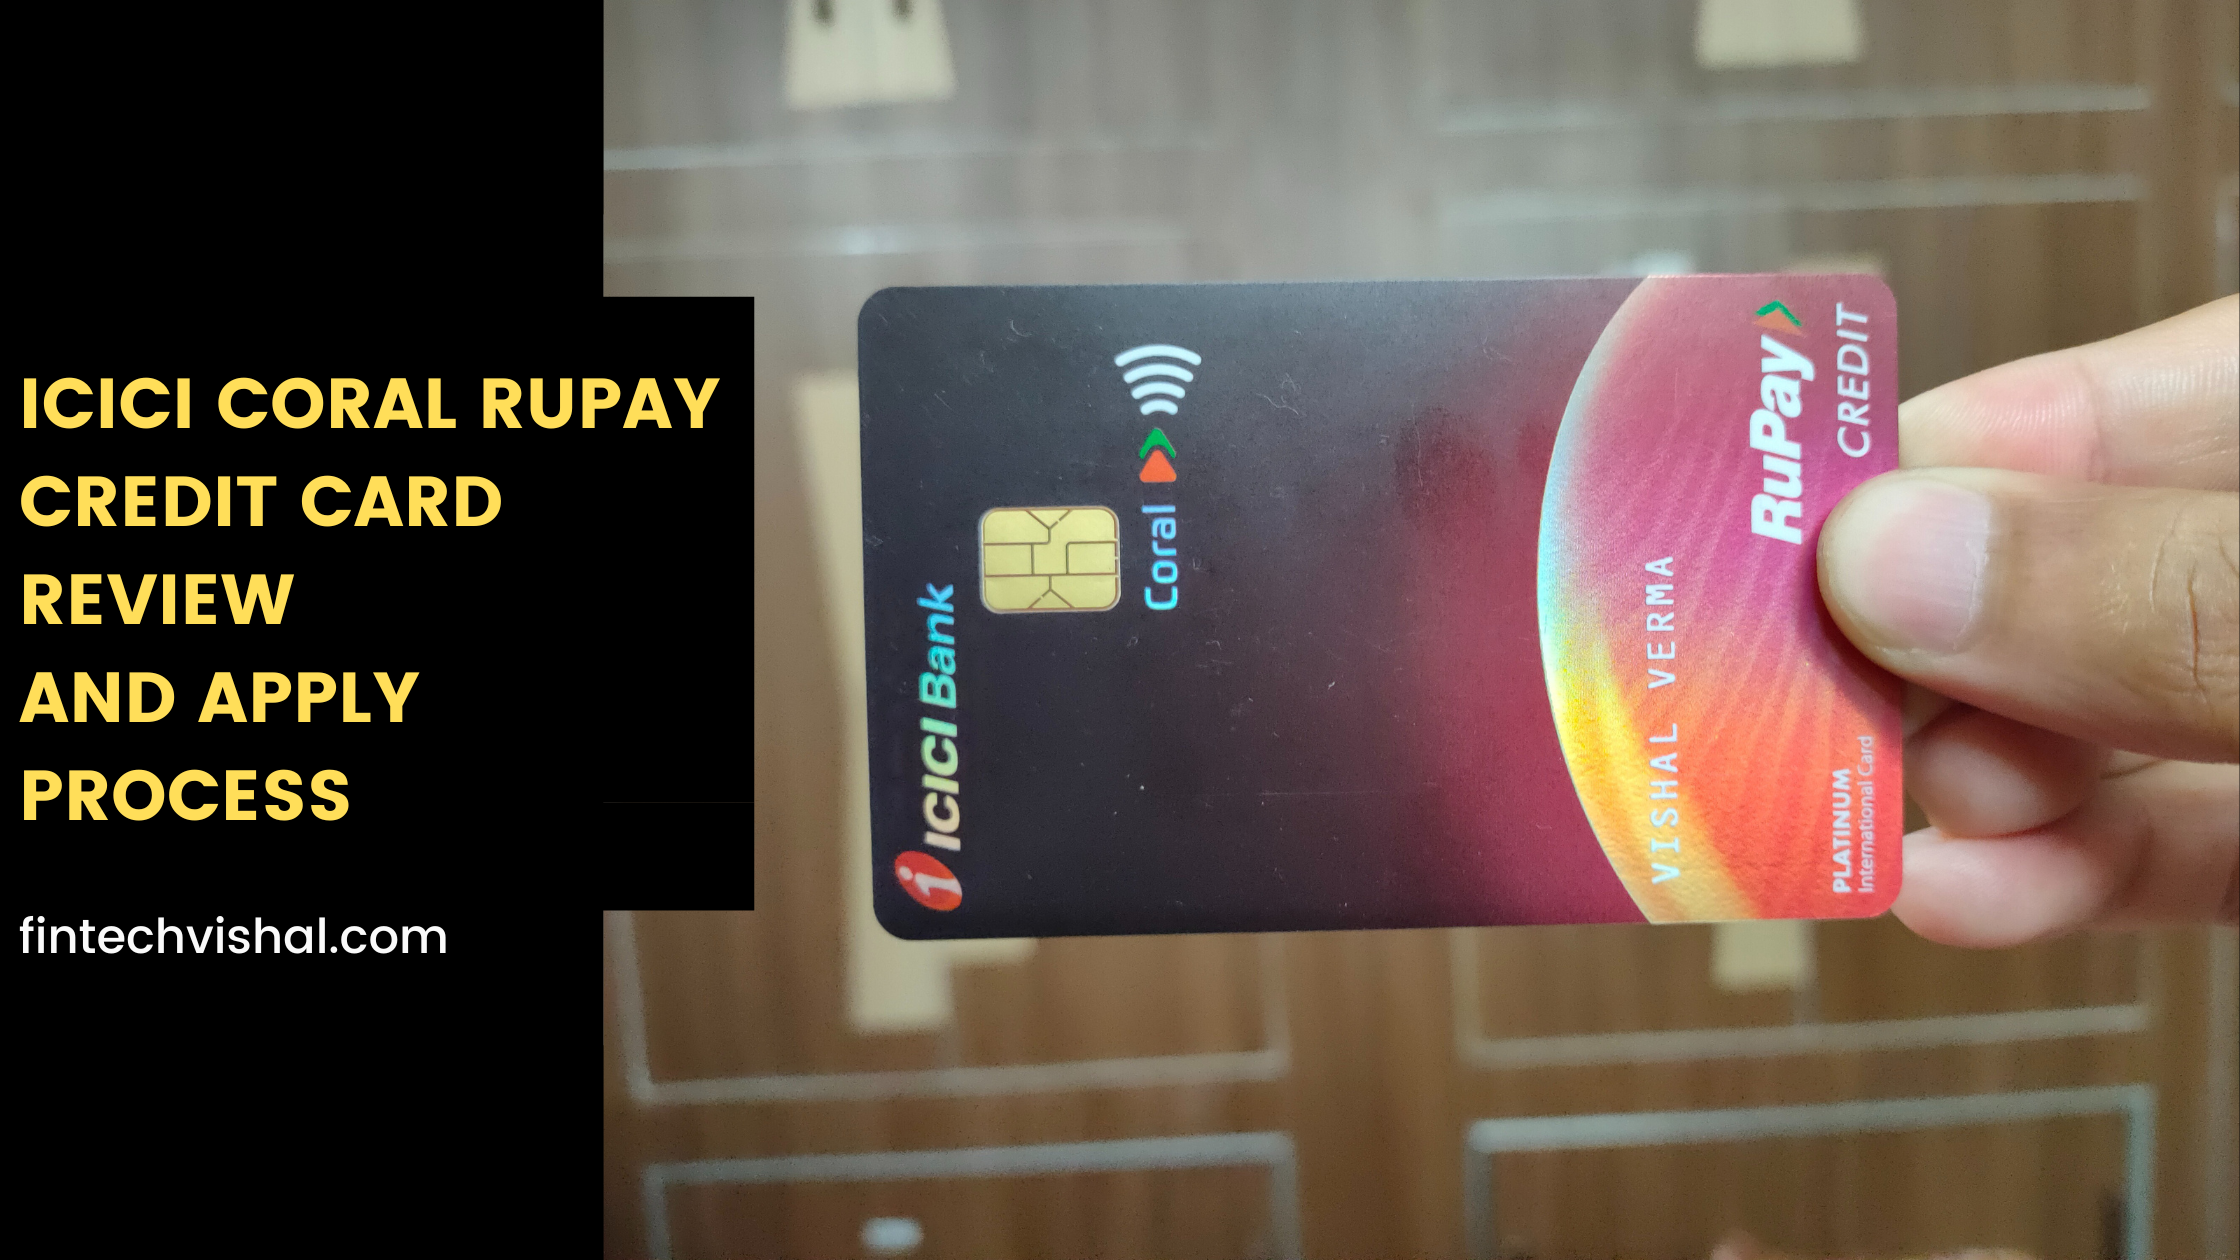 ICICI Coral Rupay Credit Card Review and Apply Process